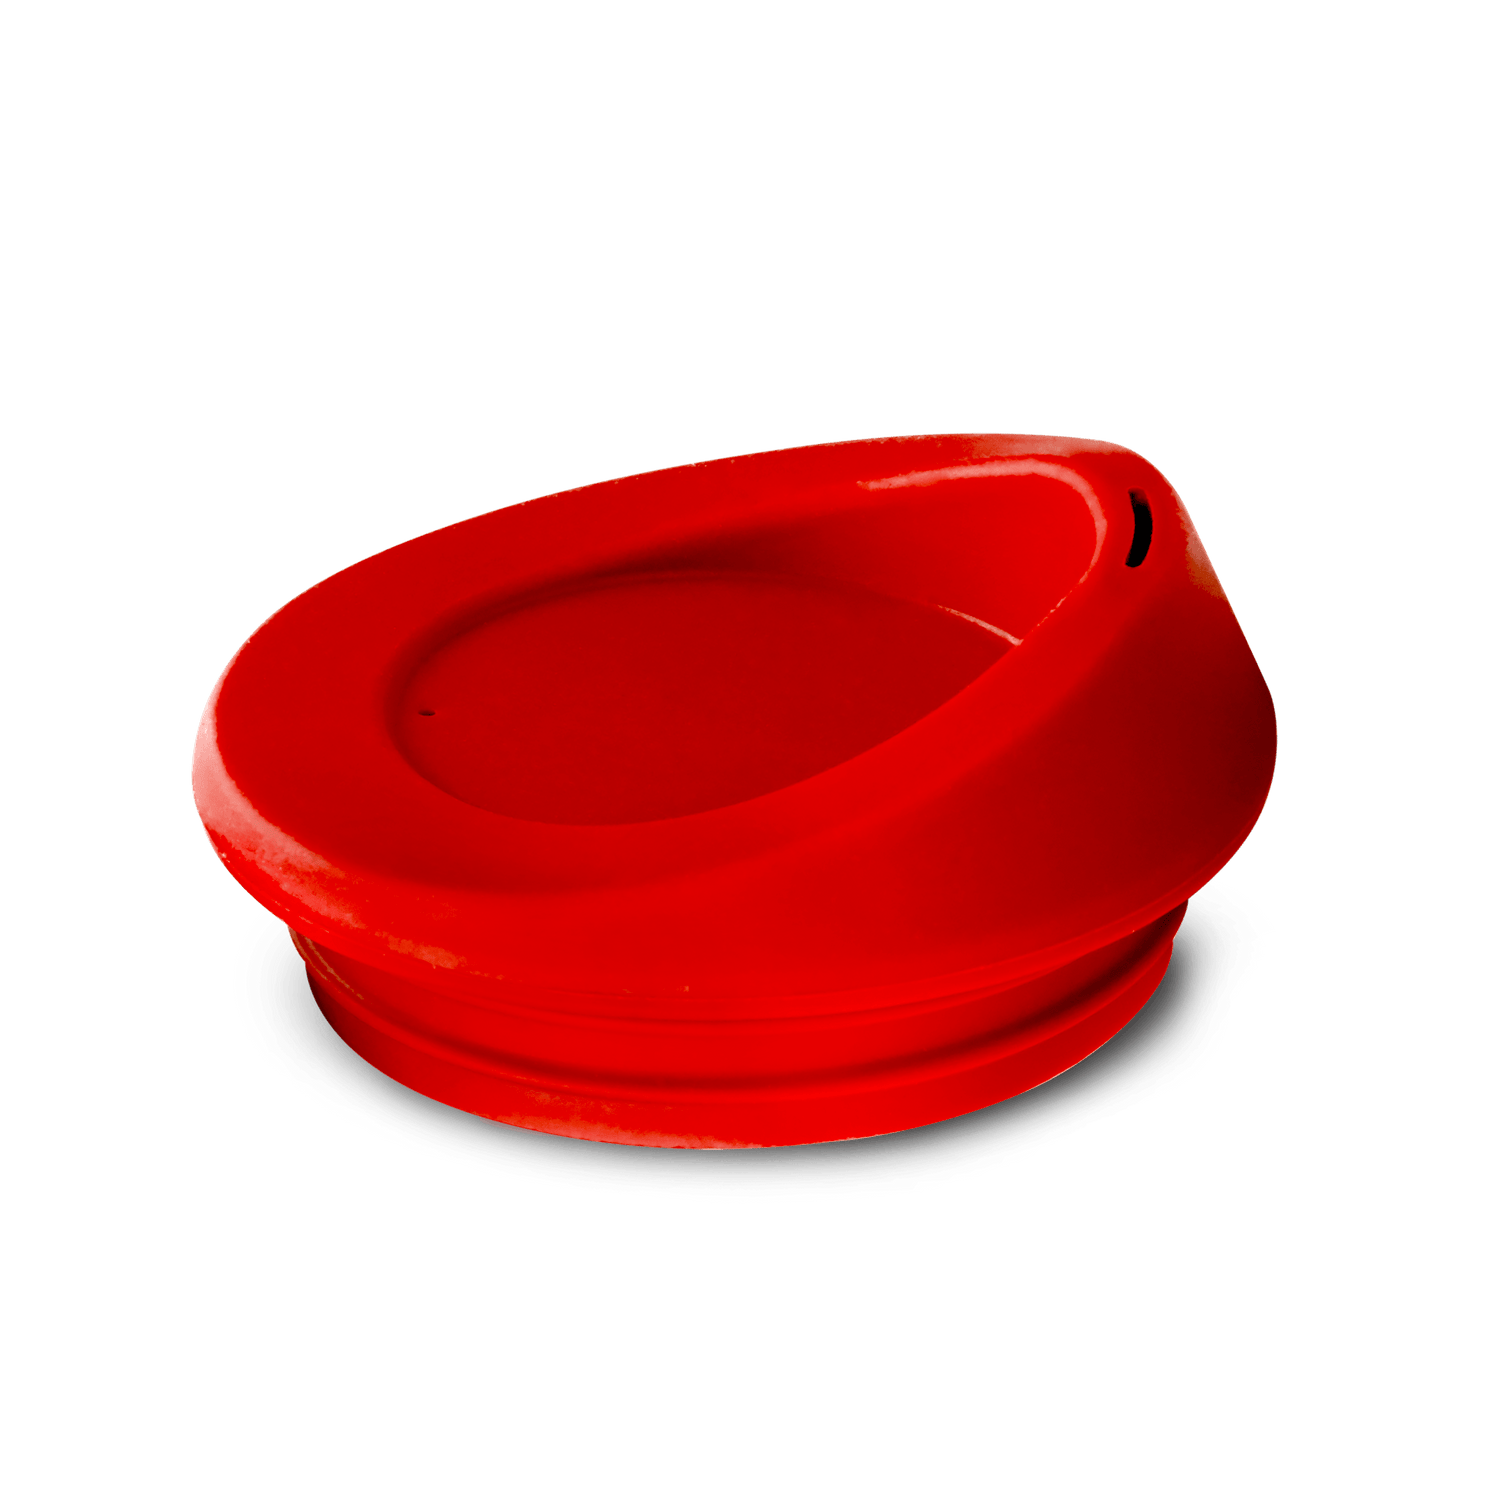 Silicone Reusable To-Go Coffee Cup Lid